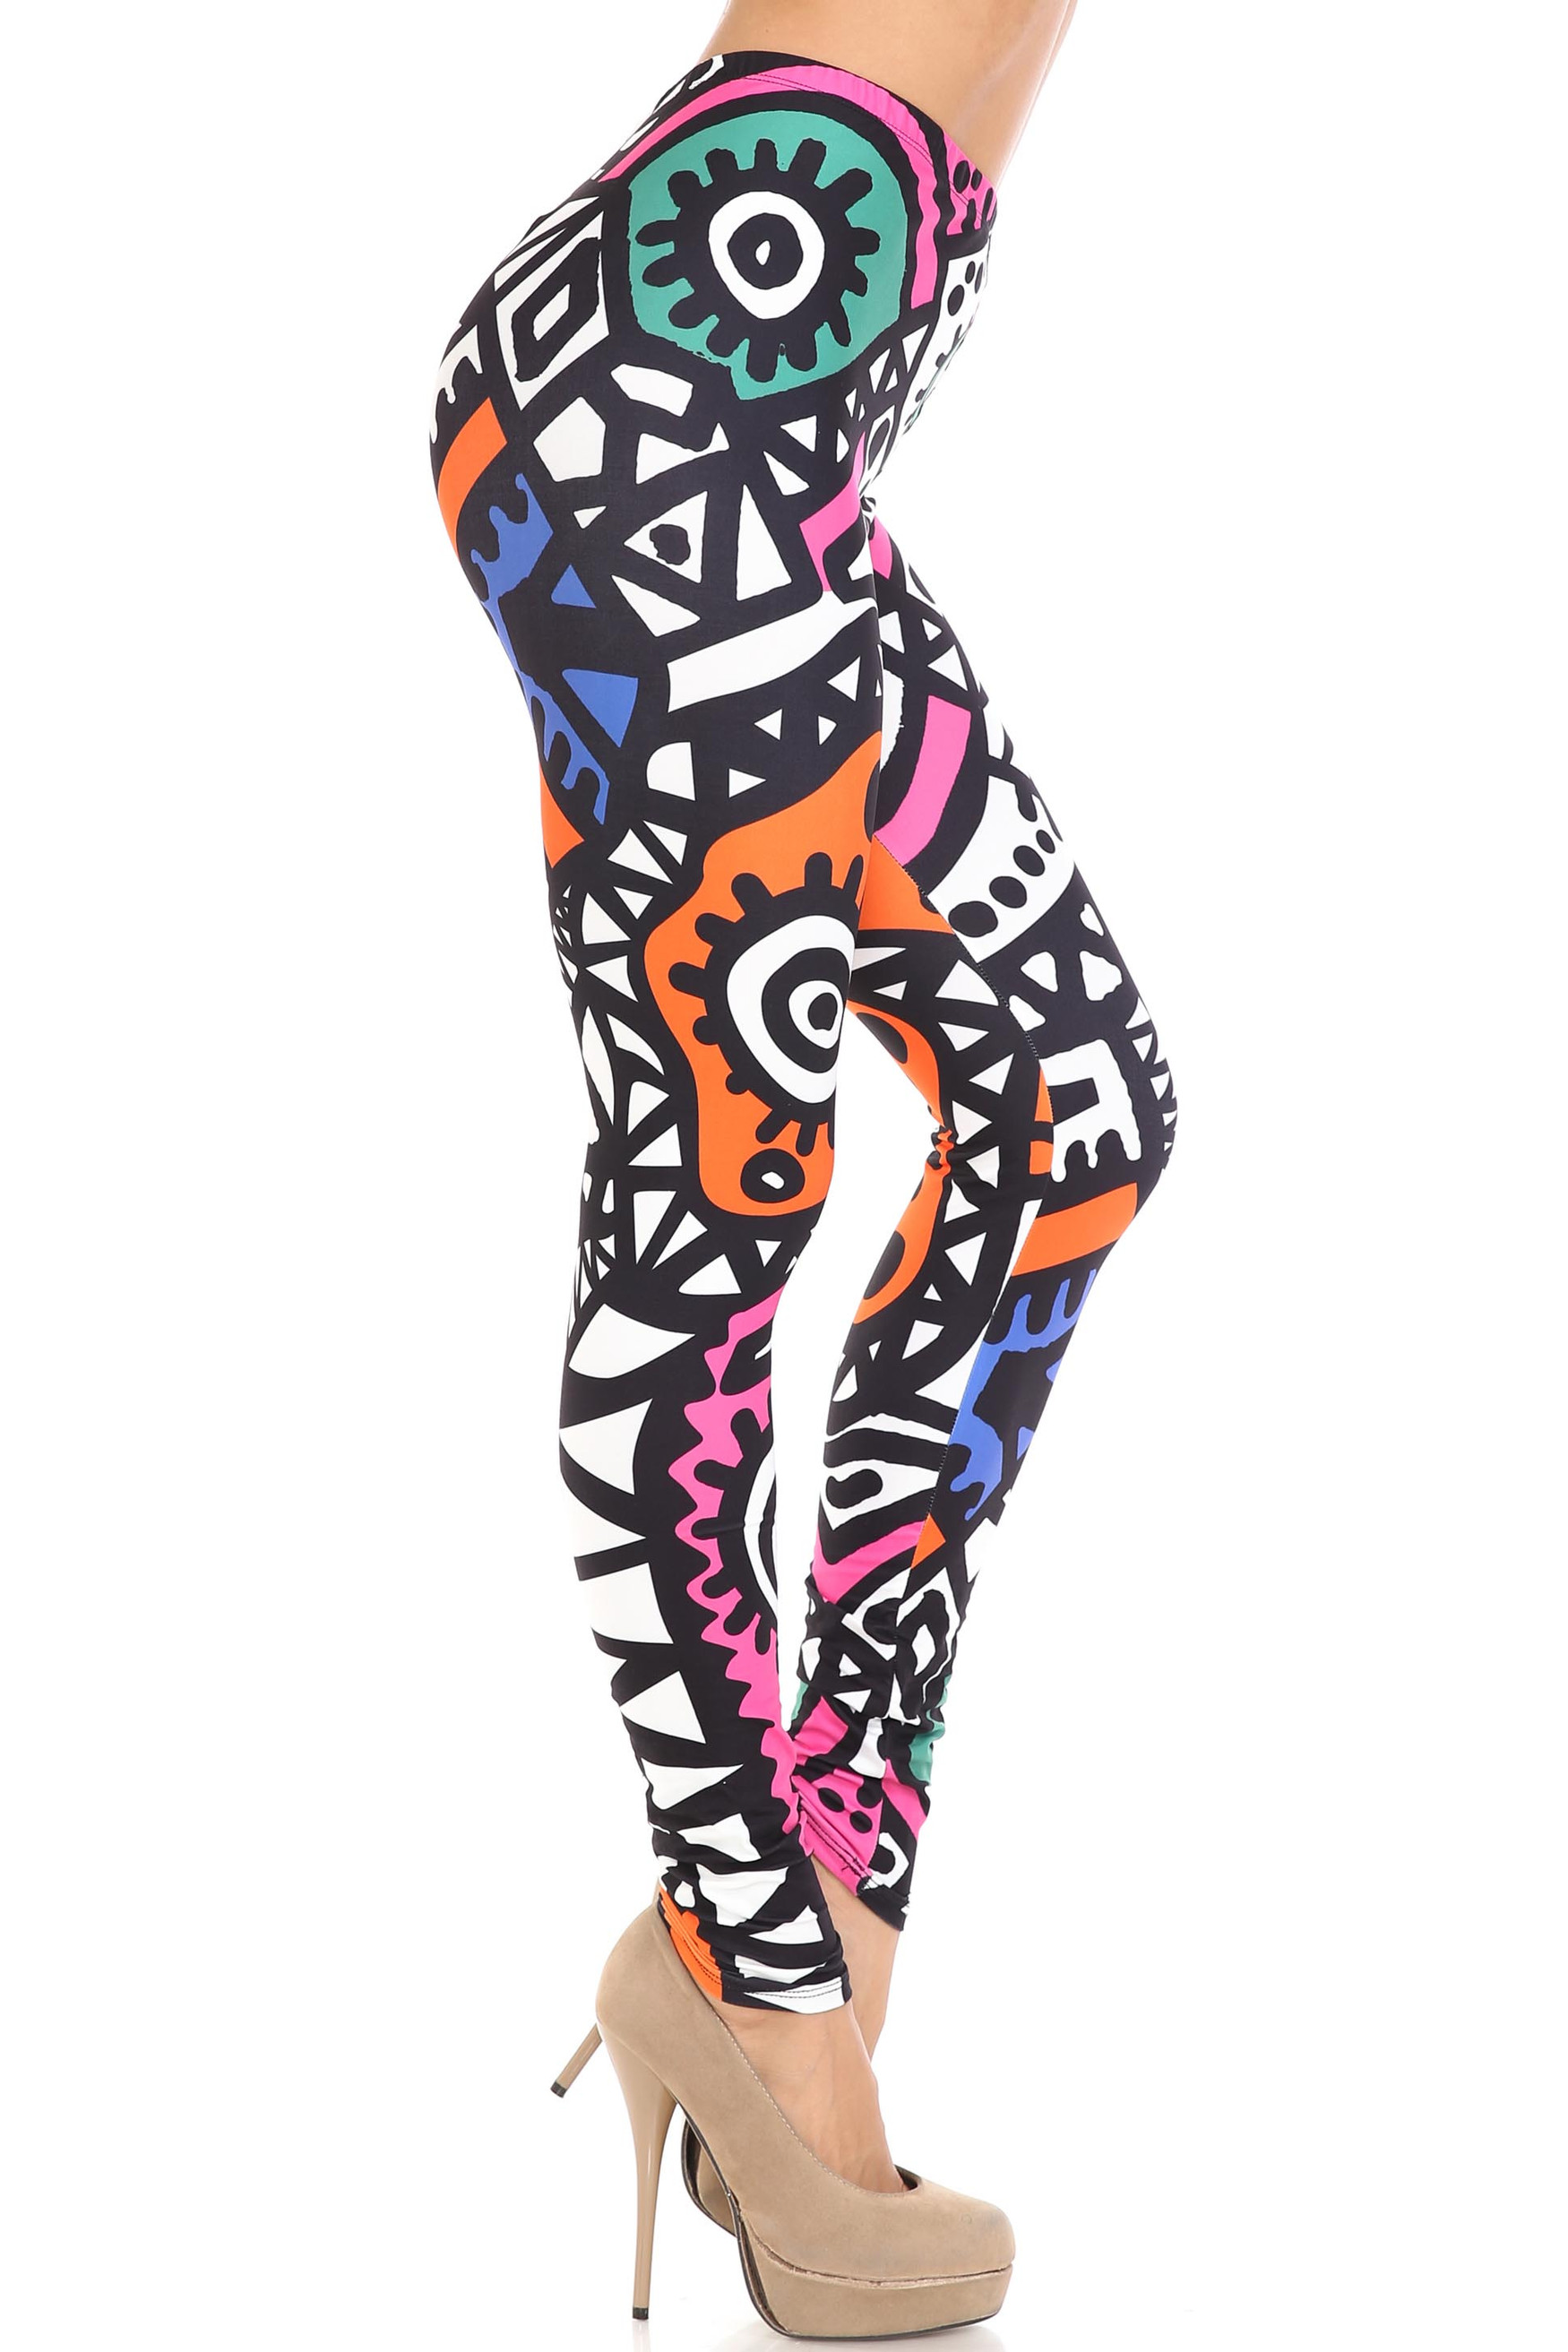 Creamy Soft Color Tribe Extra Plus Size Leggings - 3X-5X - By USA Fashion™